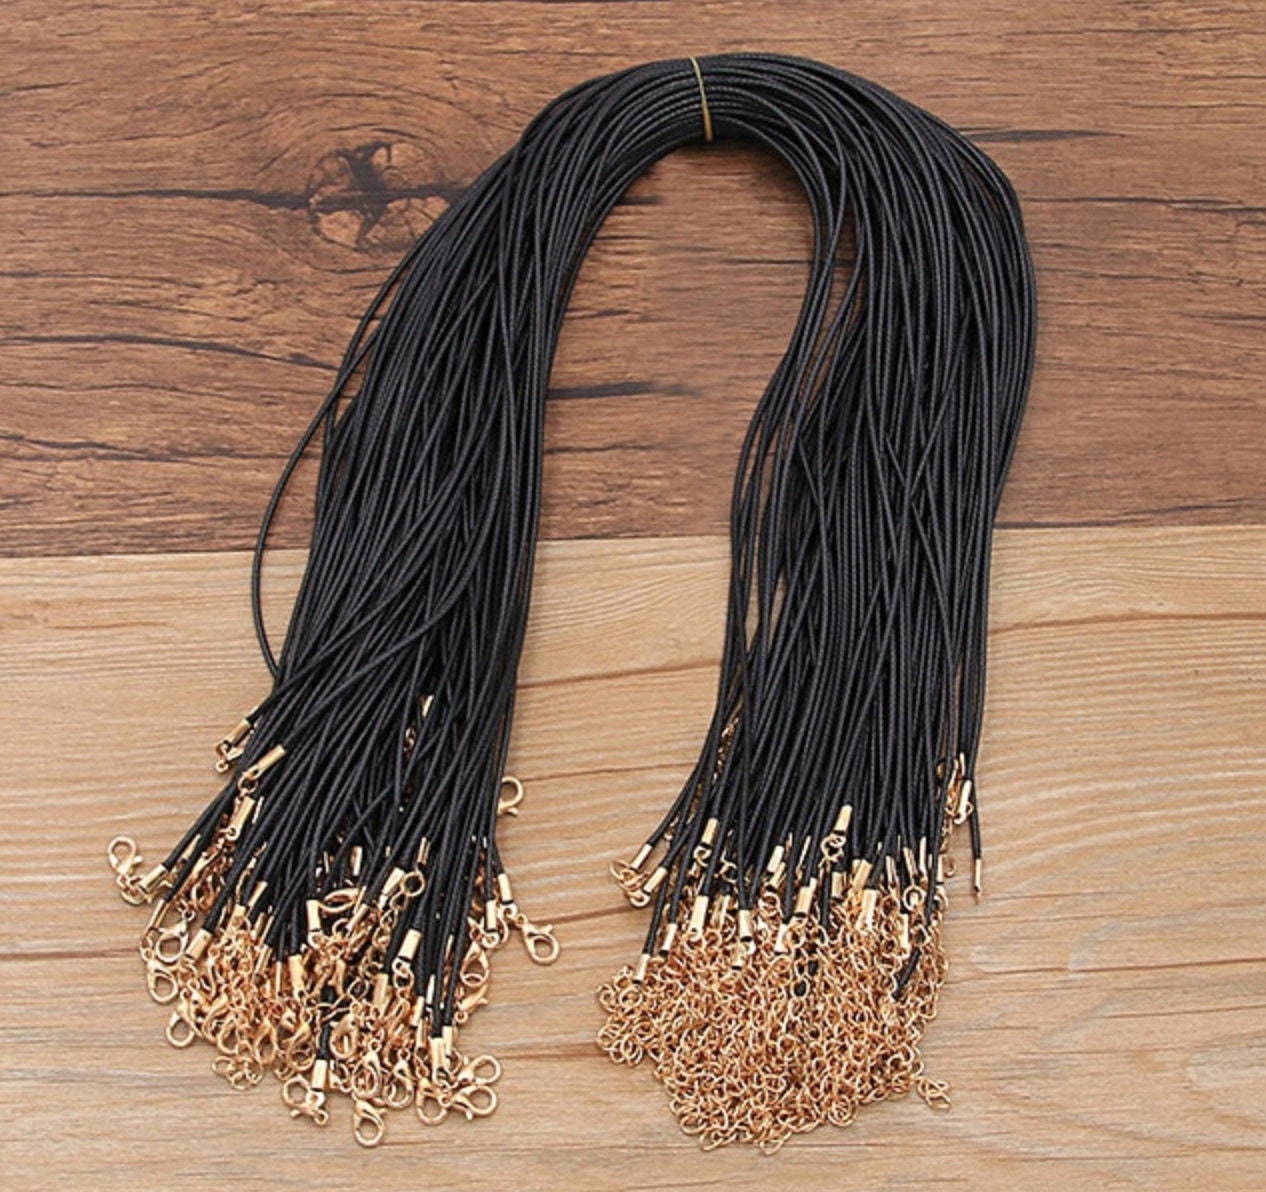 Braided Leather Cord Adjustable 1.5mm x 45cm Black or Brown | Lobster Clasp String Cord 1.5mm | Rope For DIY Necklace or Bracelet